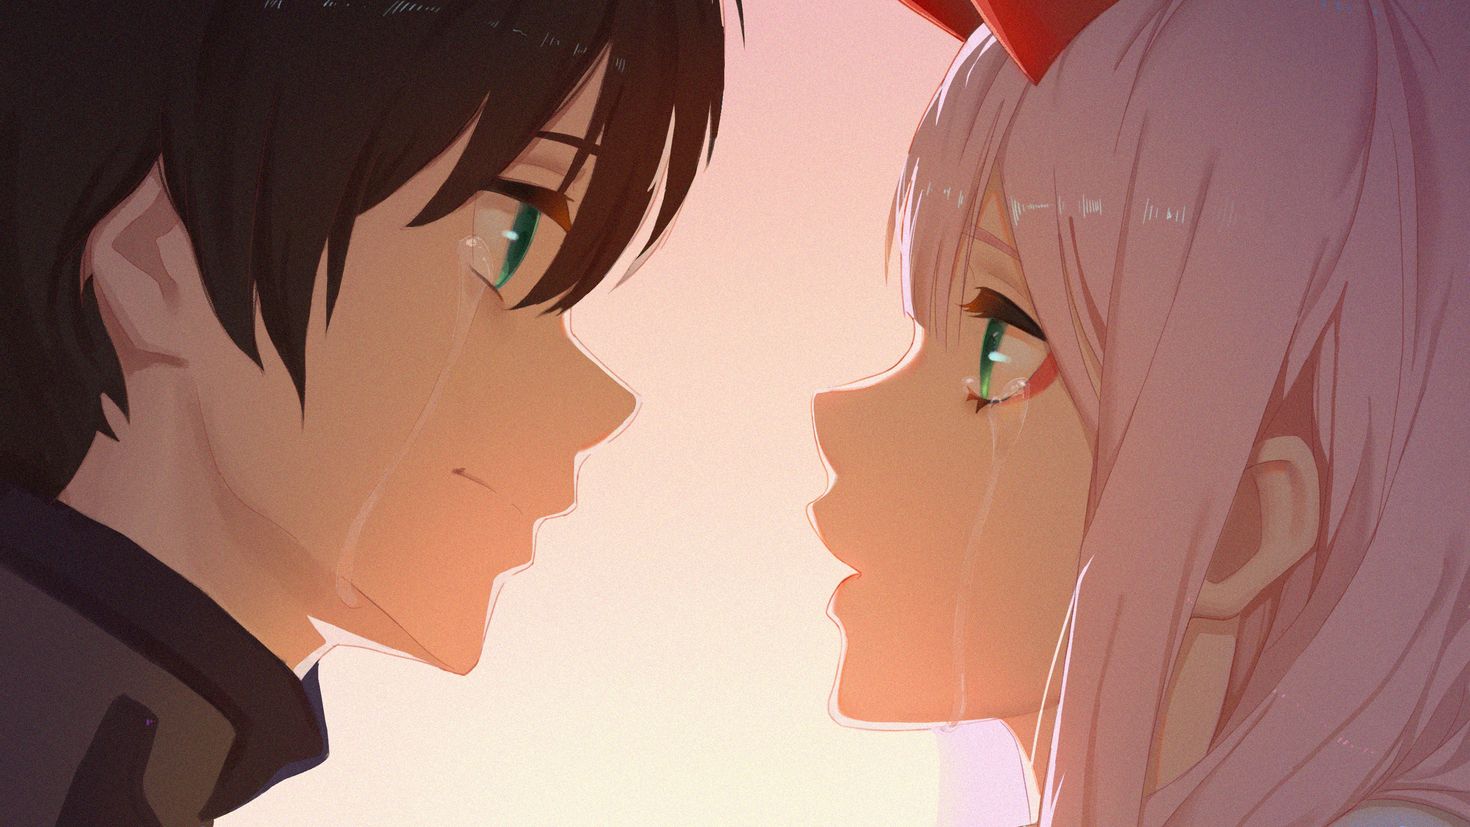 Kiss me my darling. Darling in the FRANXX 002 И Хиро. Милый во Франксе 02 и Хиро.